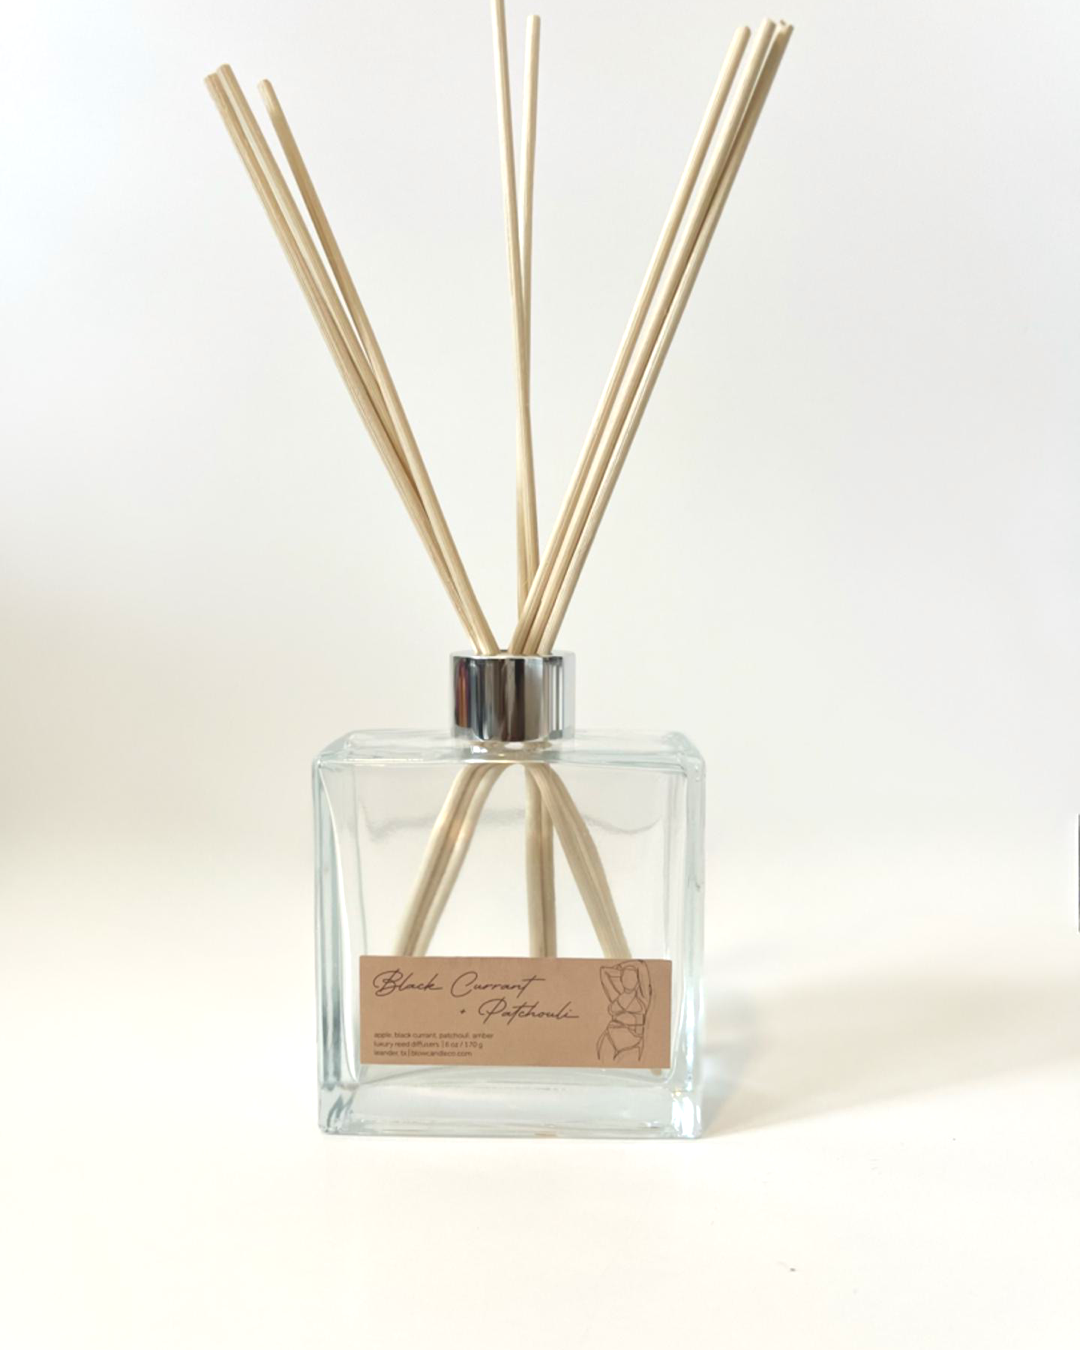 Black Currant and Patchouli Reed Diffusers